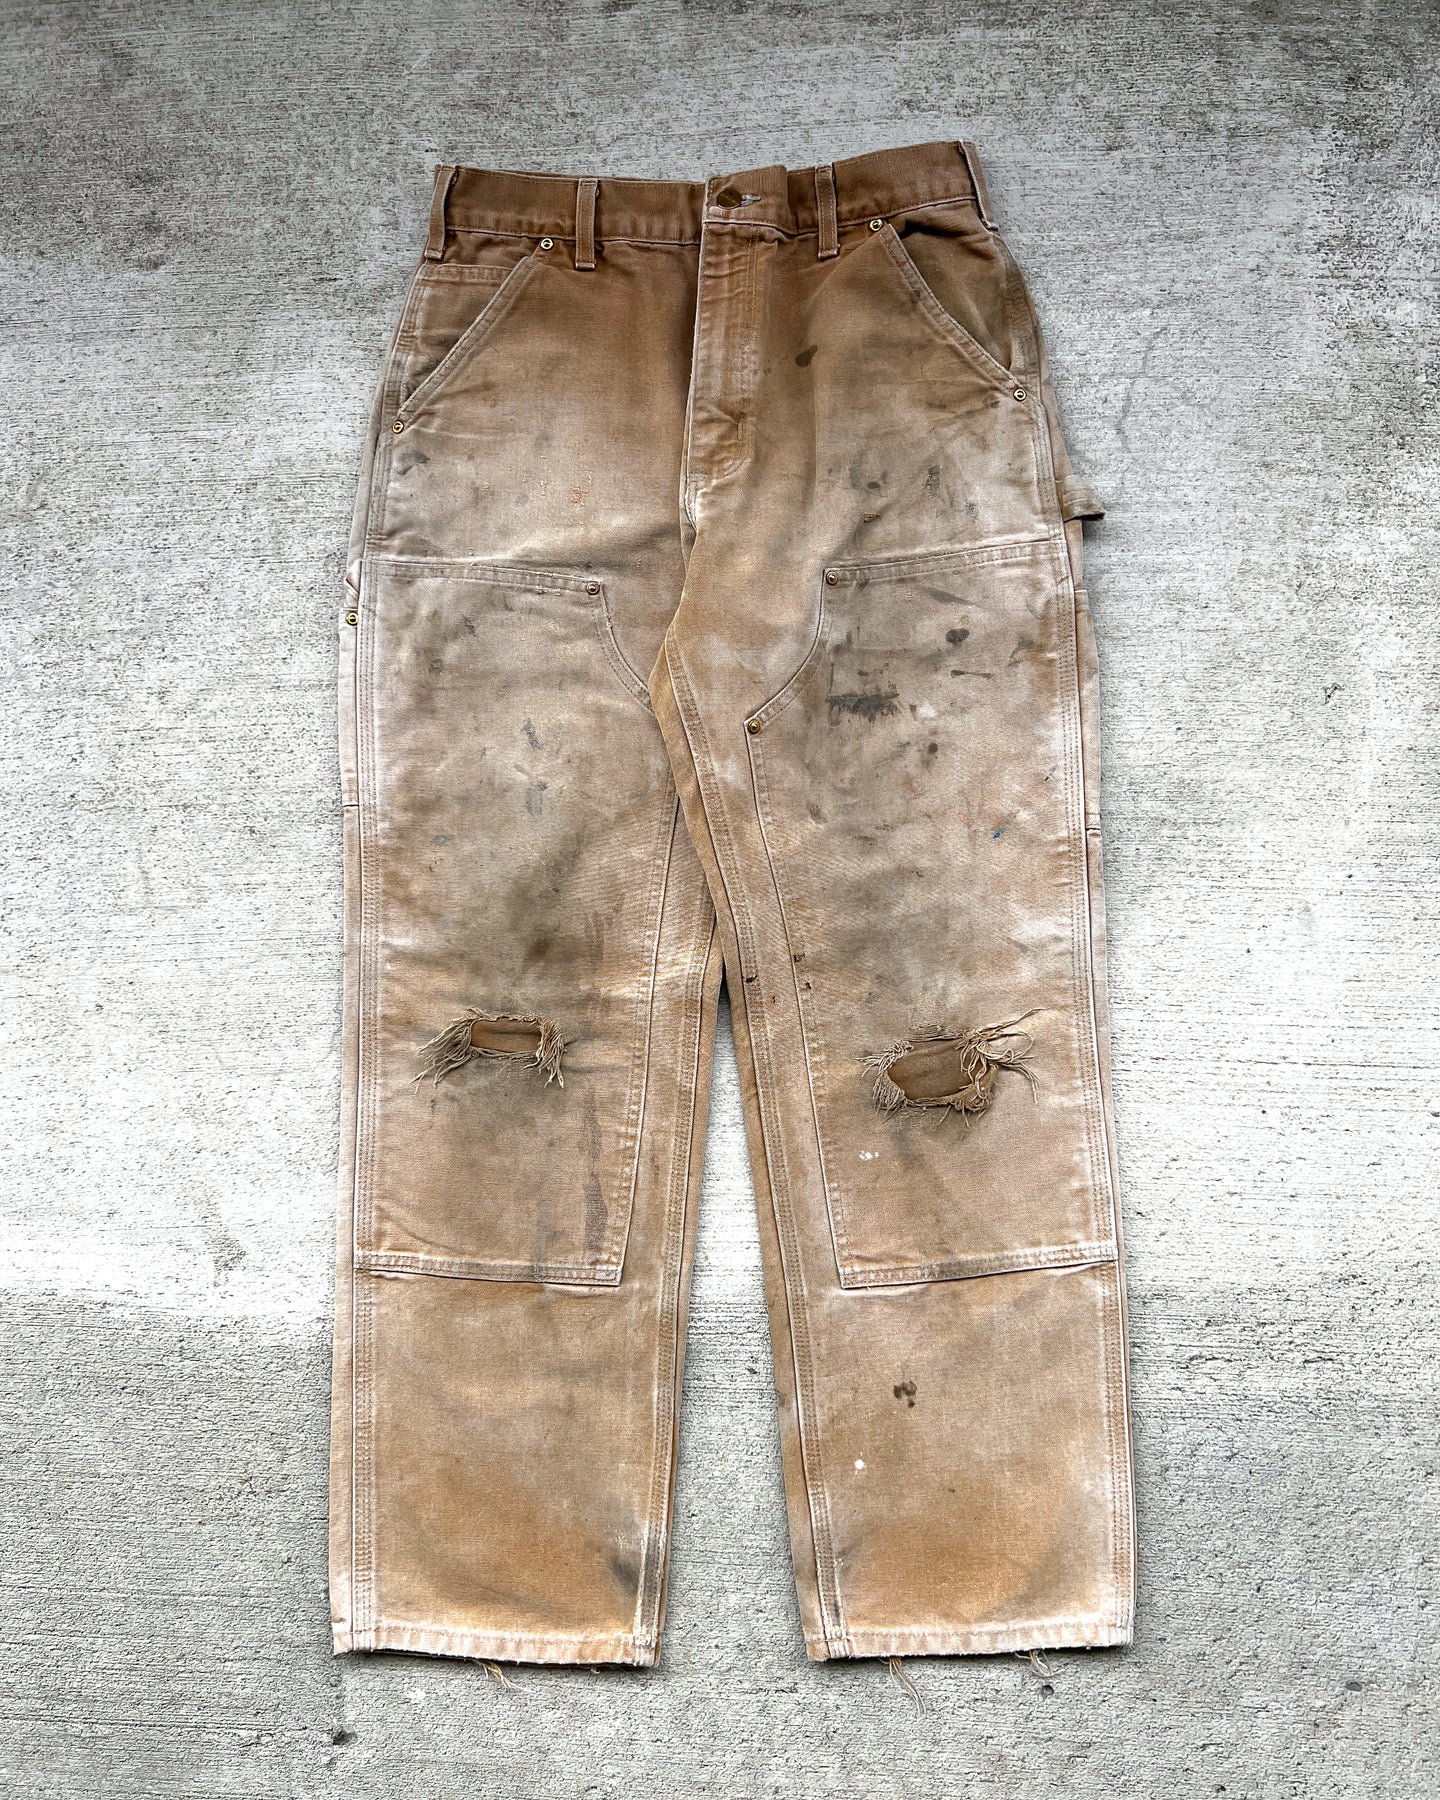 1990s Distressed Carhartt Double Knee Faded Work Pants - Size 31 x 29